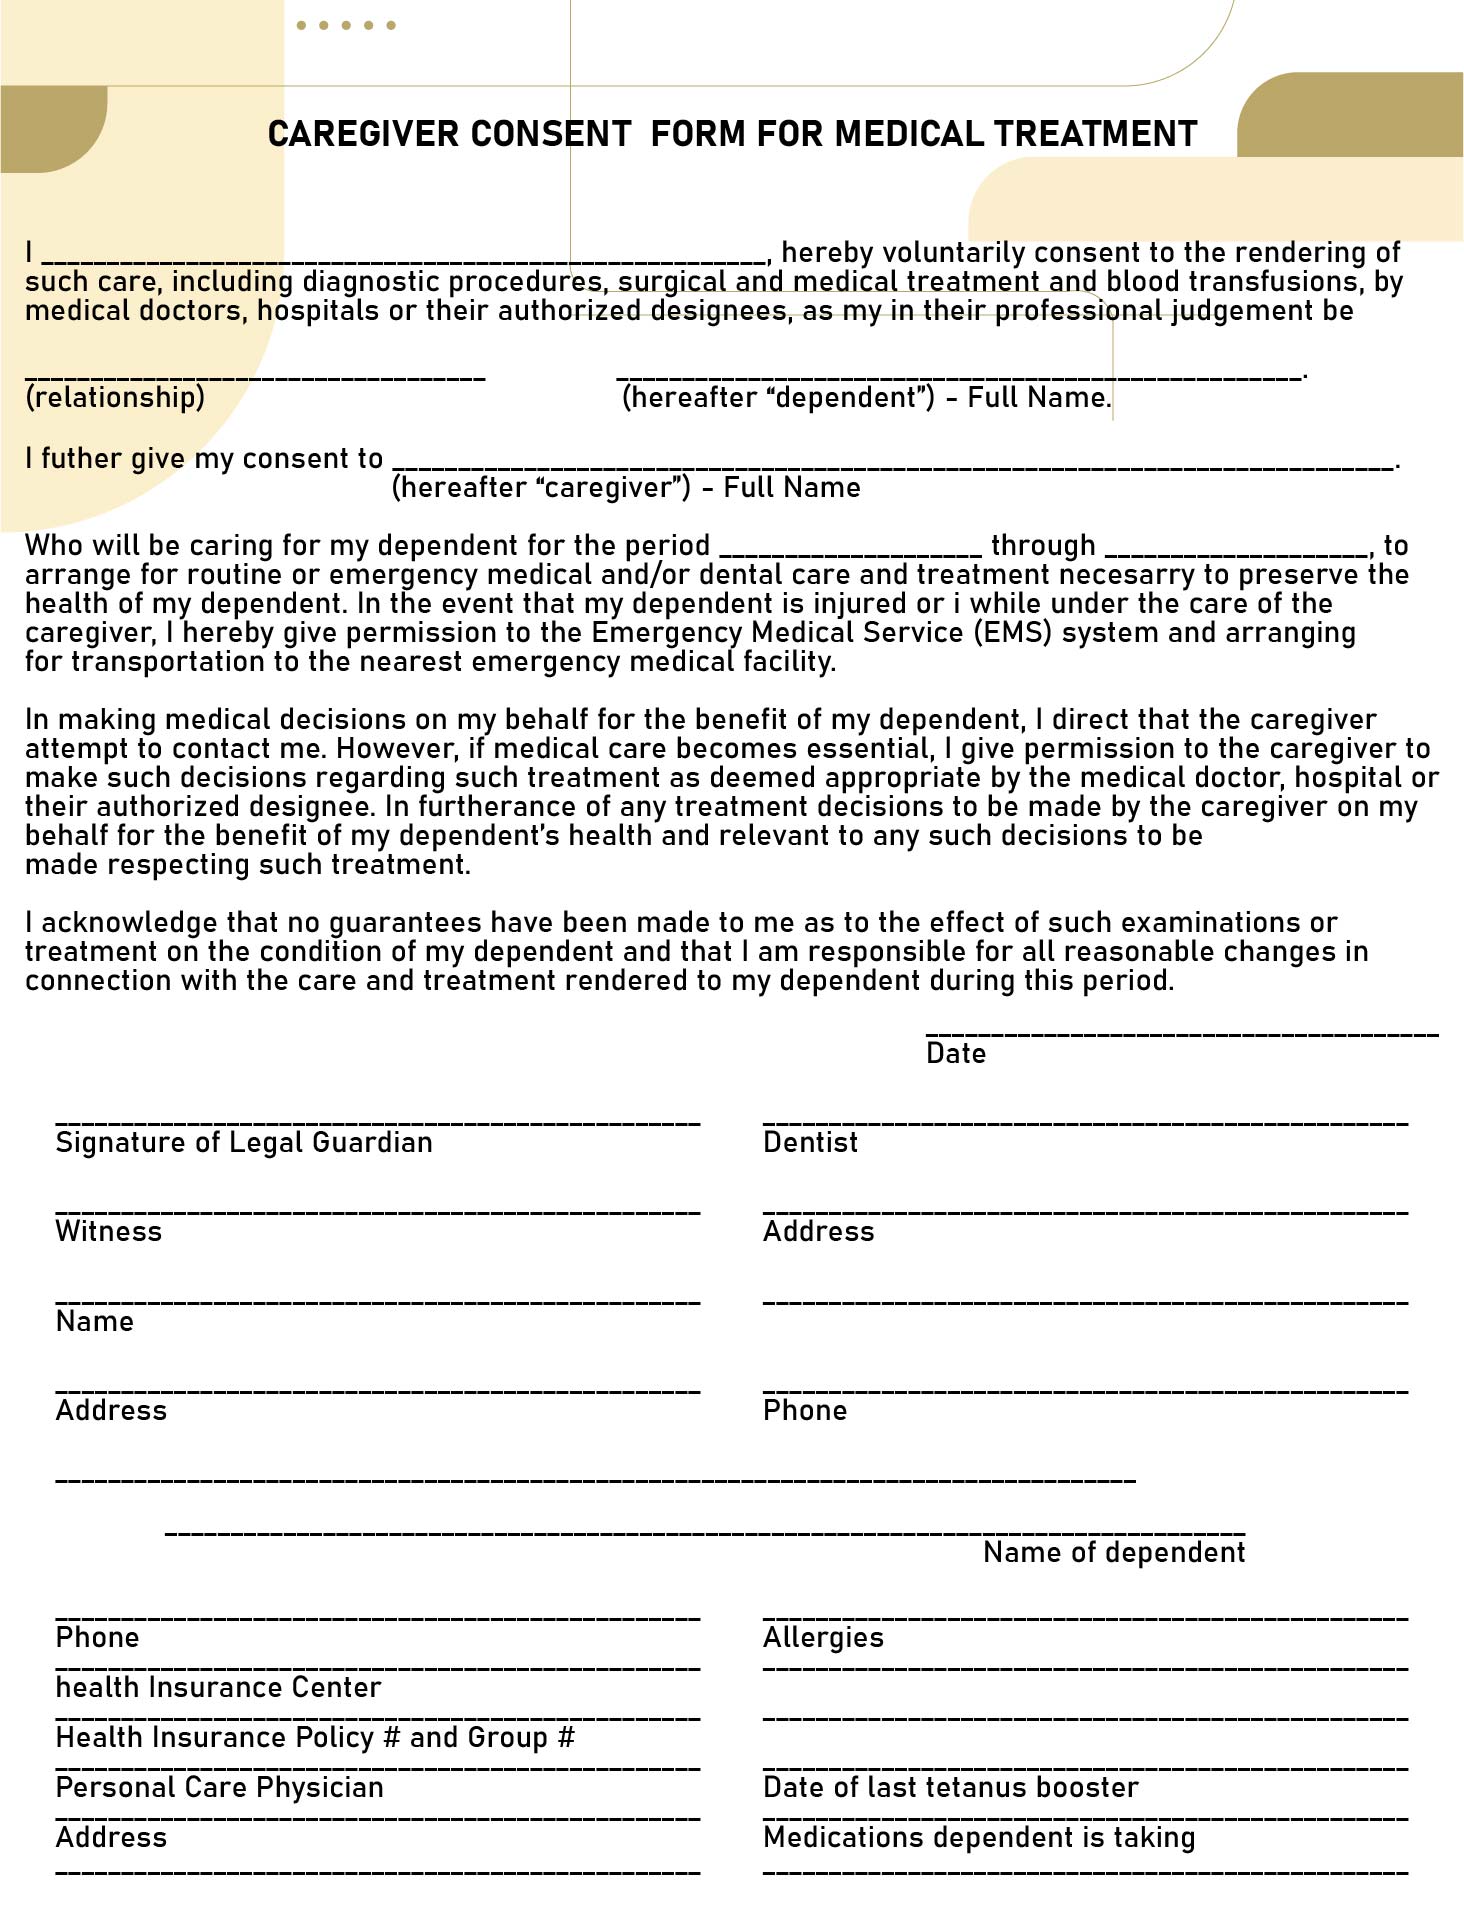 Printable Caregiver Consent Forms For Medical Treatment